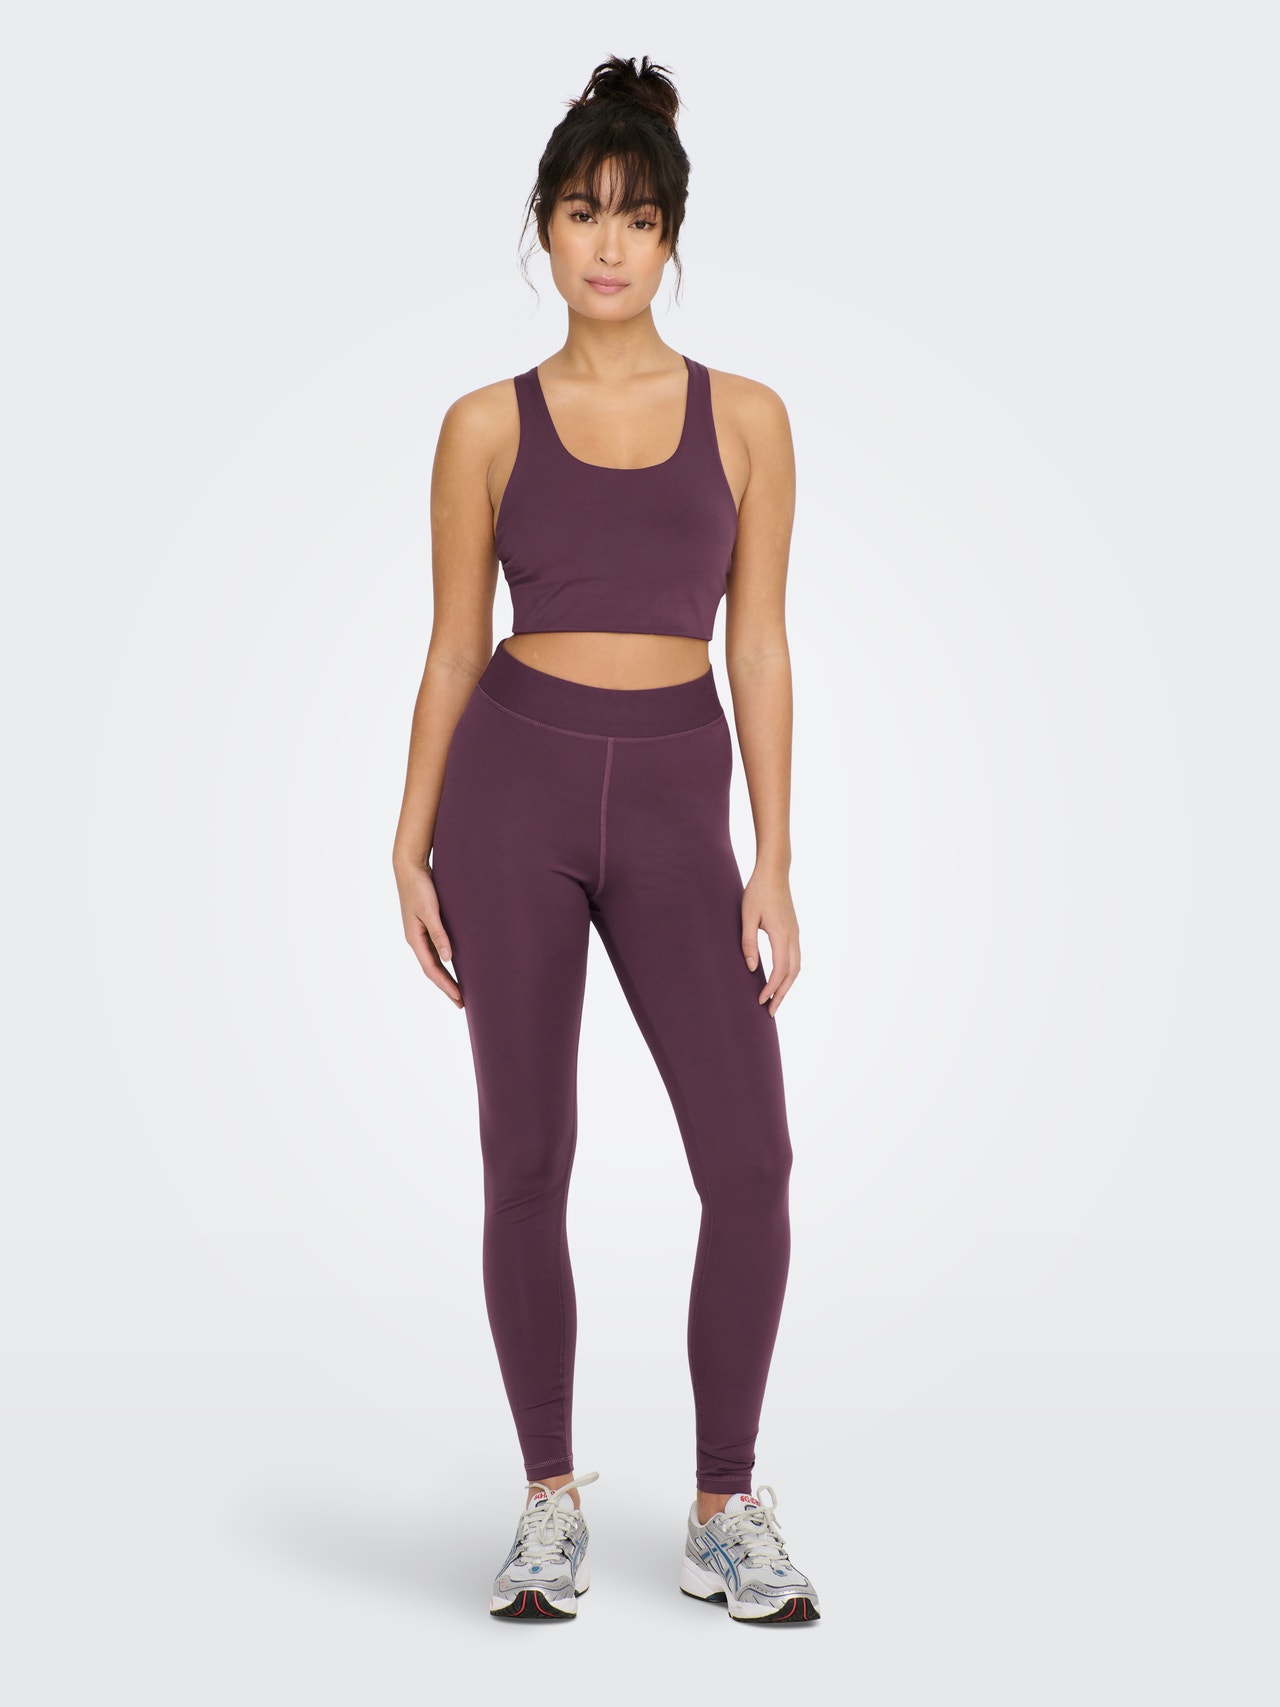 ONLY Tight Fit High waist Leggings -Eggplant - 15274112